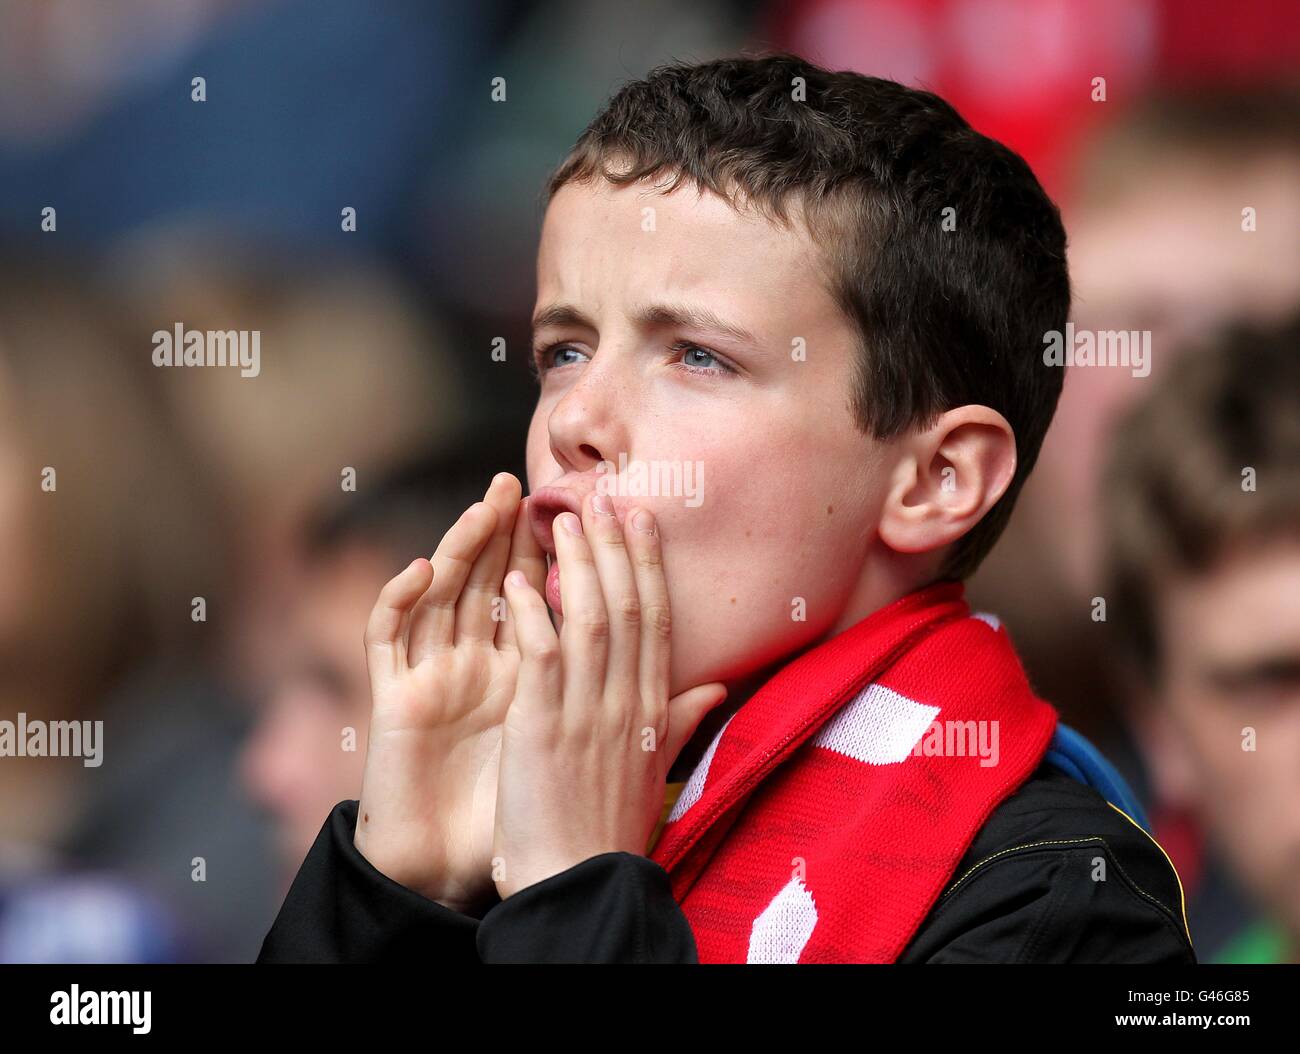 Soccer - UEFA Euro 2012 - Qualifying - Group G - Wales v England - Millennium Stadium. A young football fan shows support for his team. Stock Photo